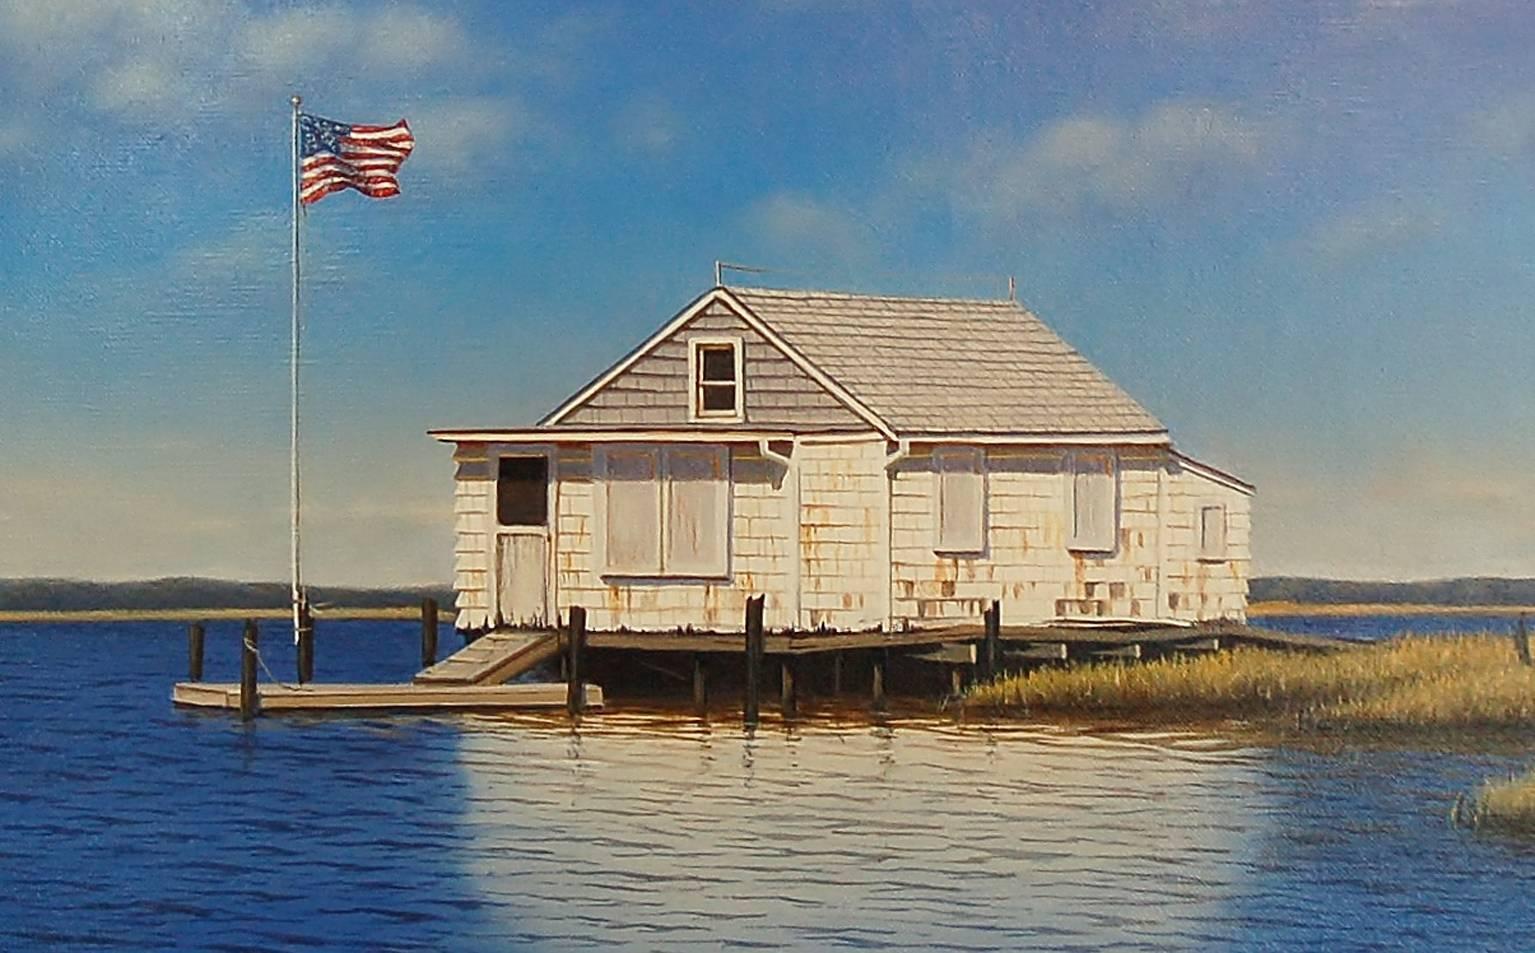 Weathered Bay House - American Realist Painting by Daniel Pollera